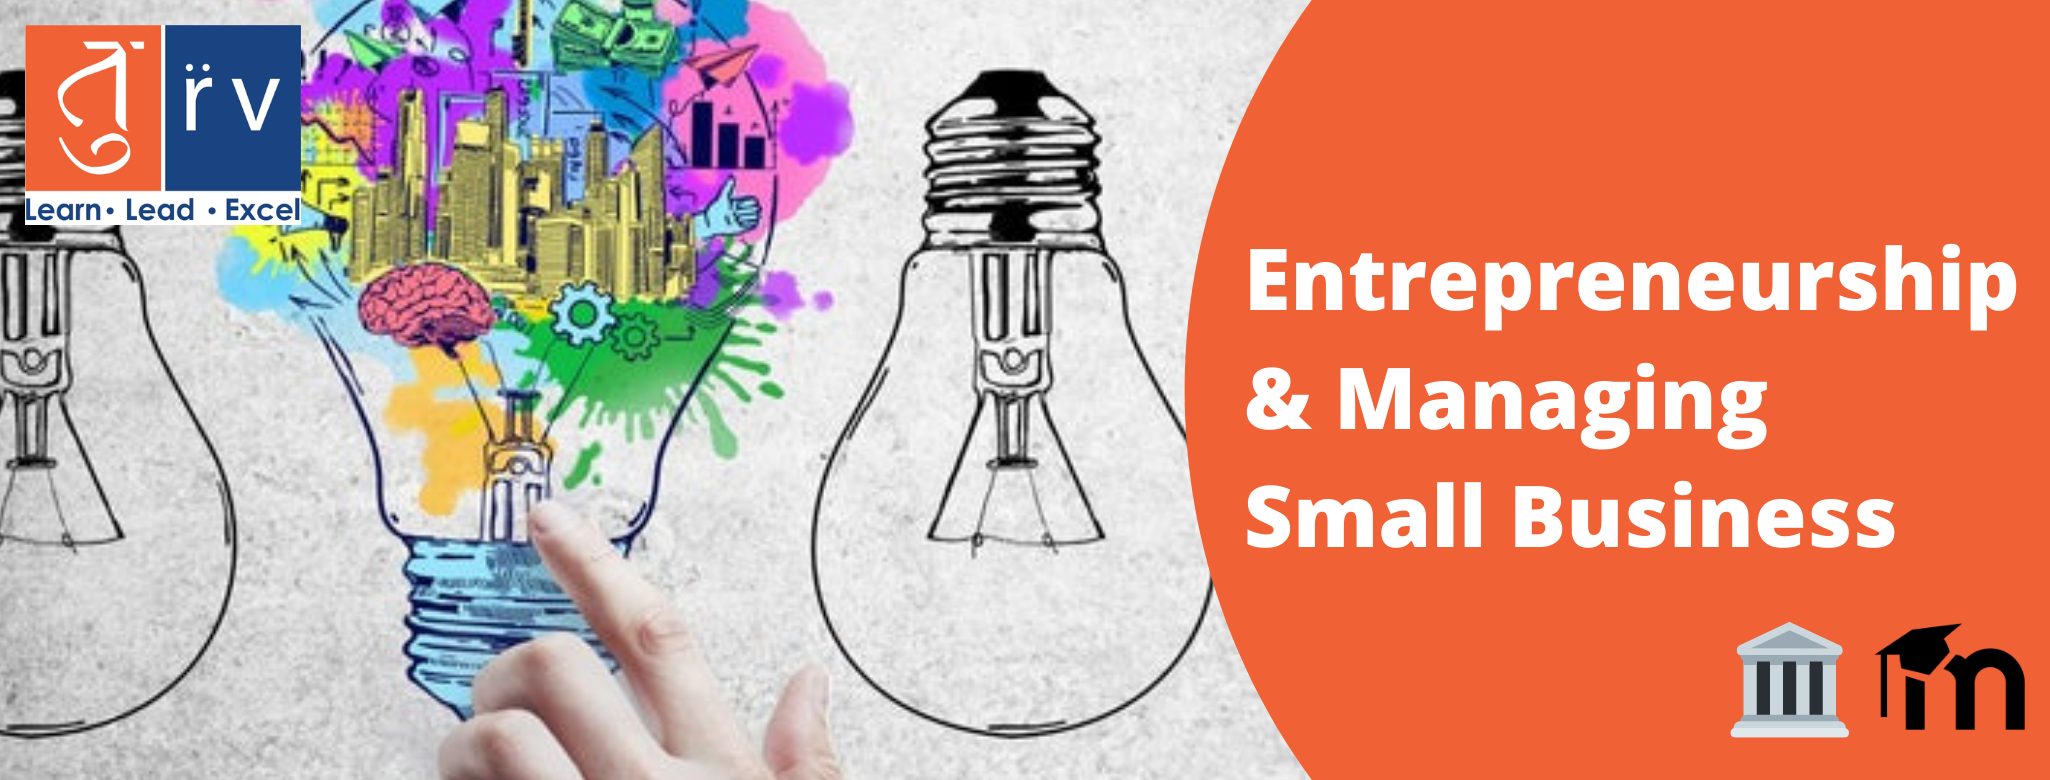 Entrepreneurship and Management of Small Business